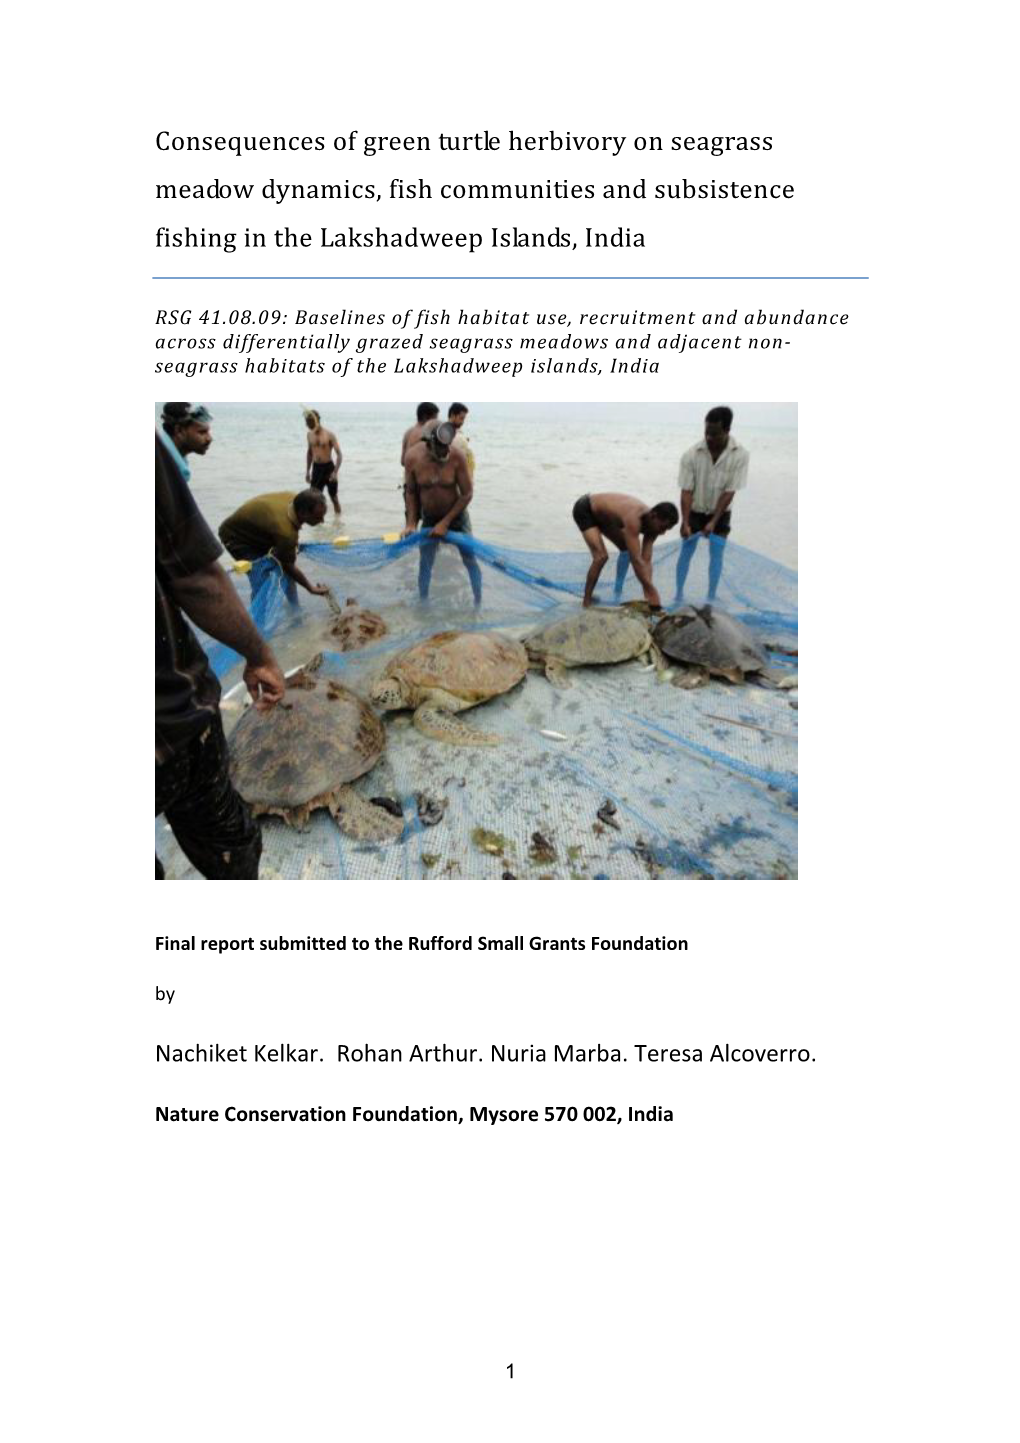 Consequences of Green Turtle Herbivory on Seagrass Meadow Dynamics, Fish Communities and Subsistence Fishing in the Lakshadweep Islands, India